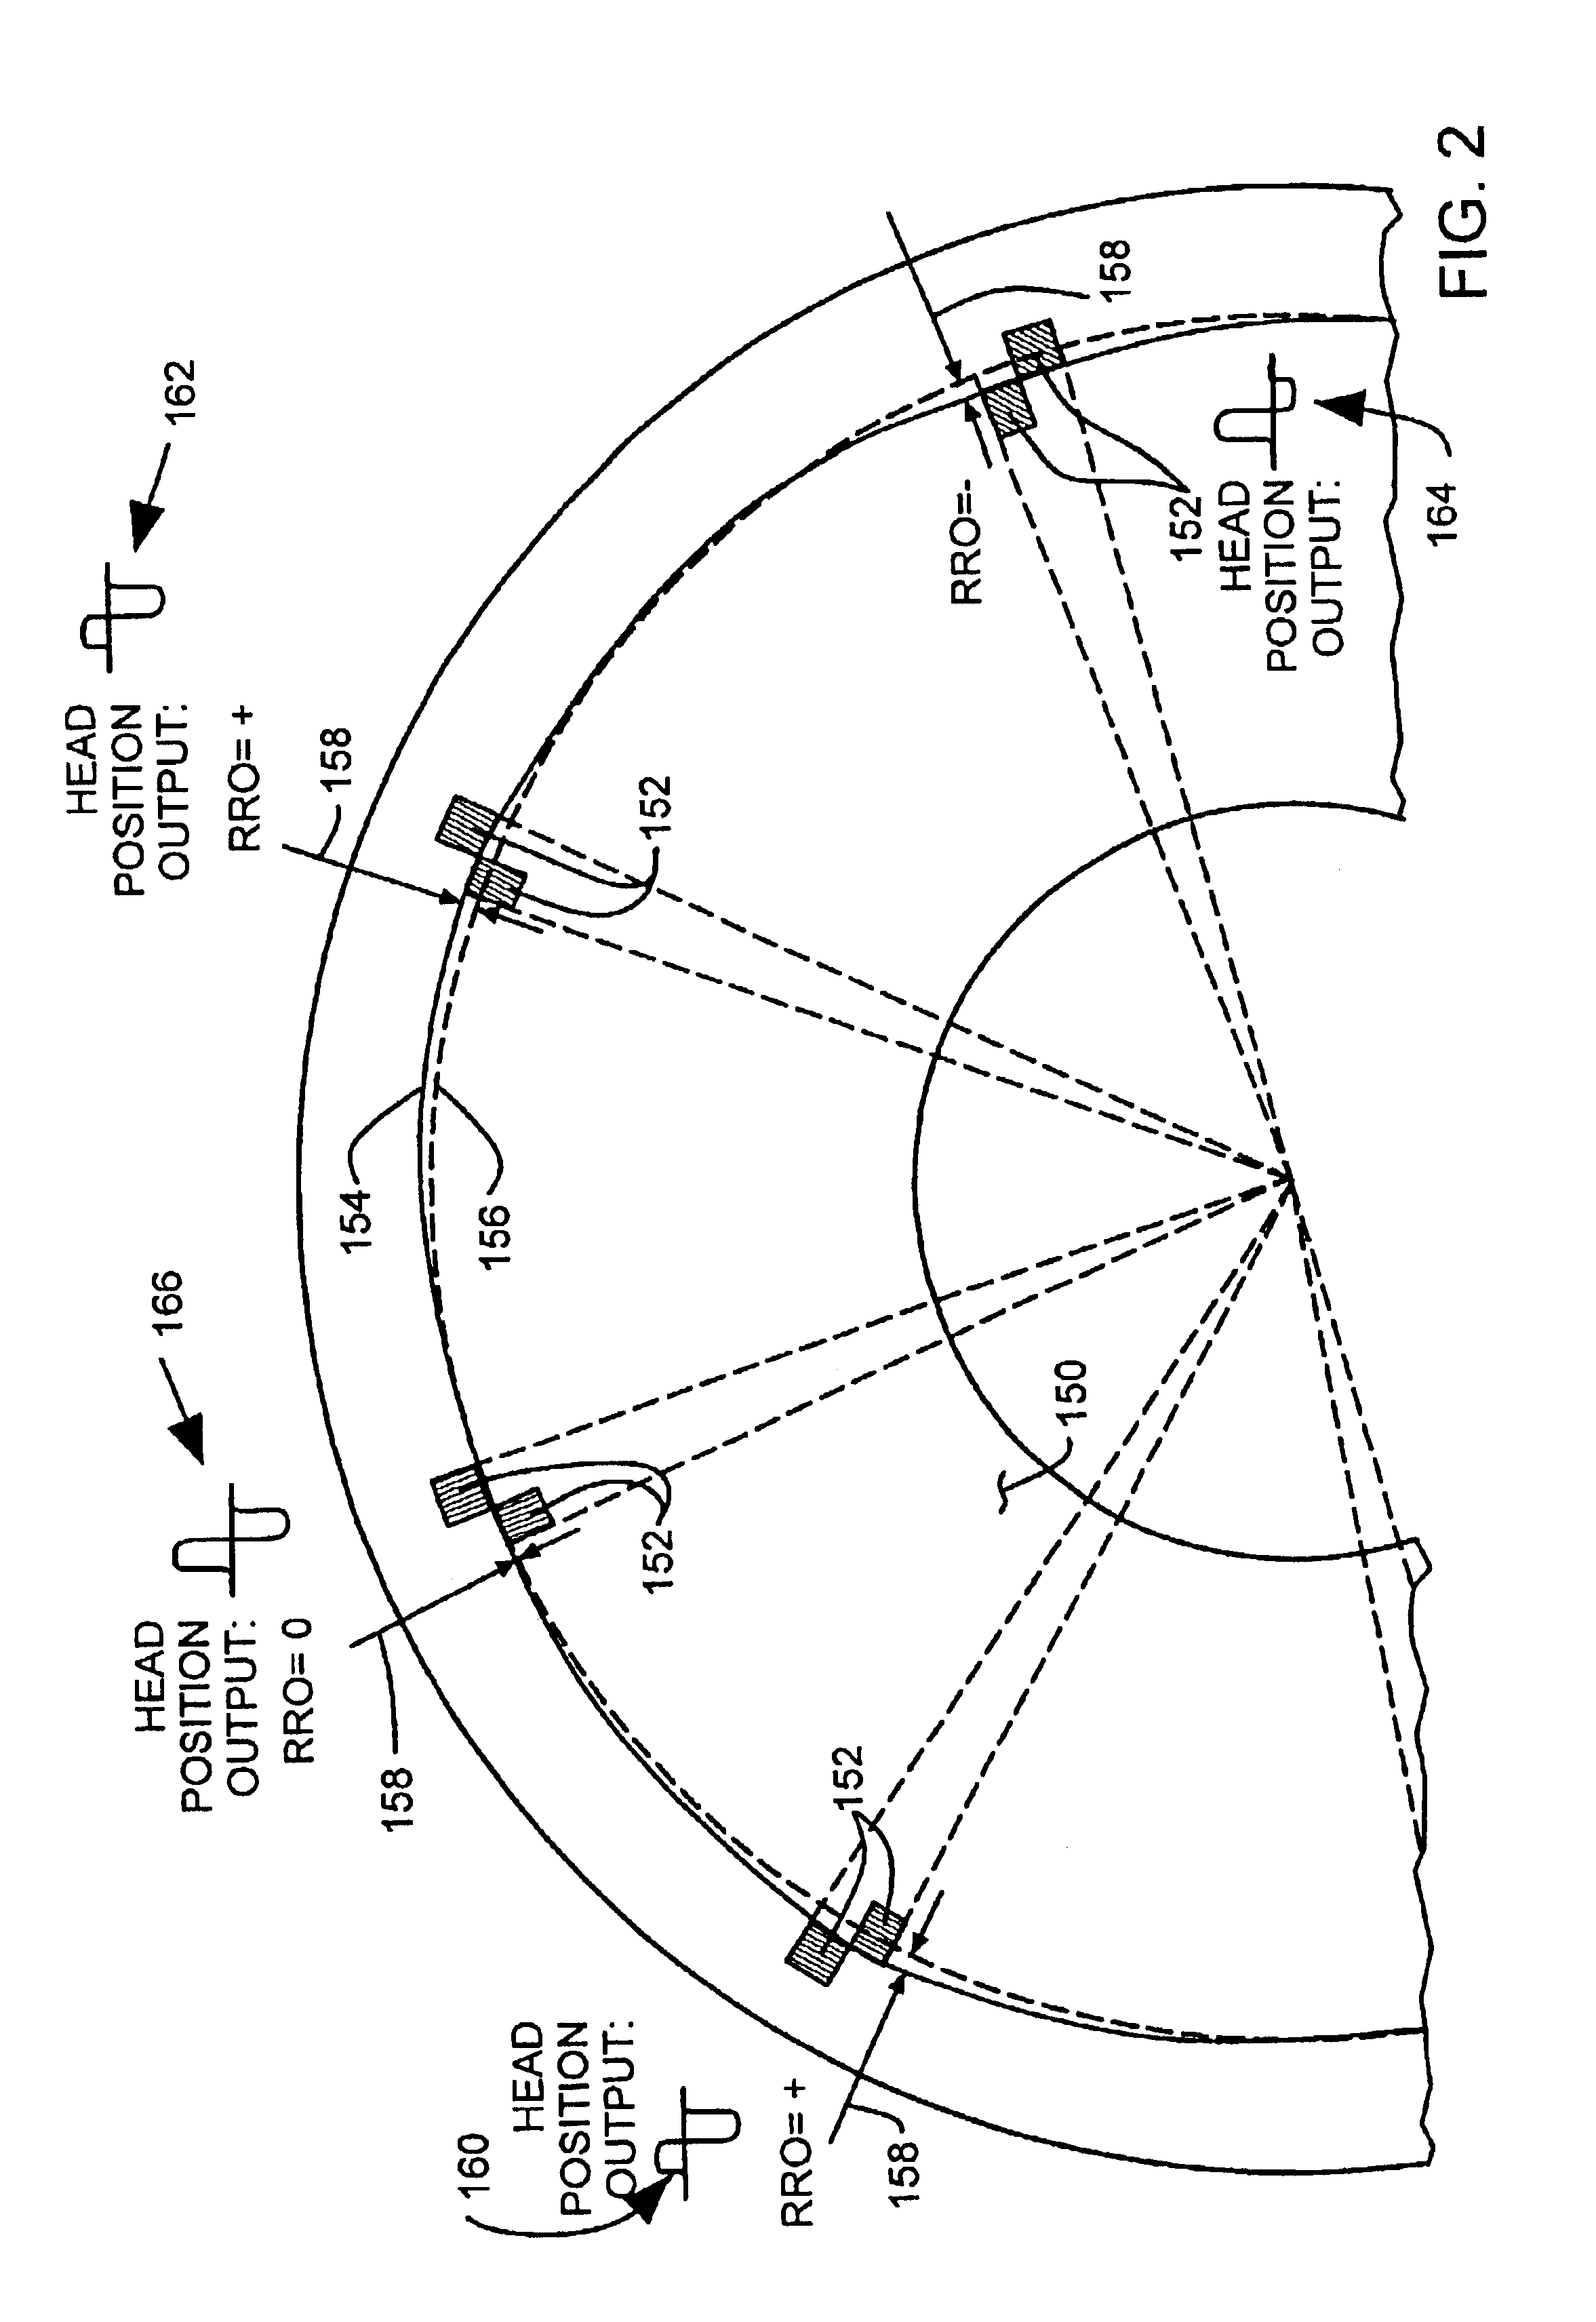 Repeatable runout compensation in a disc drive